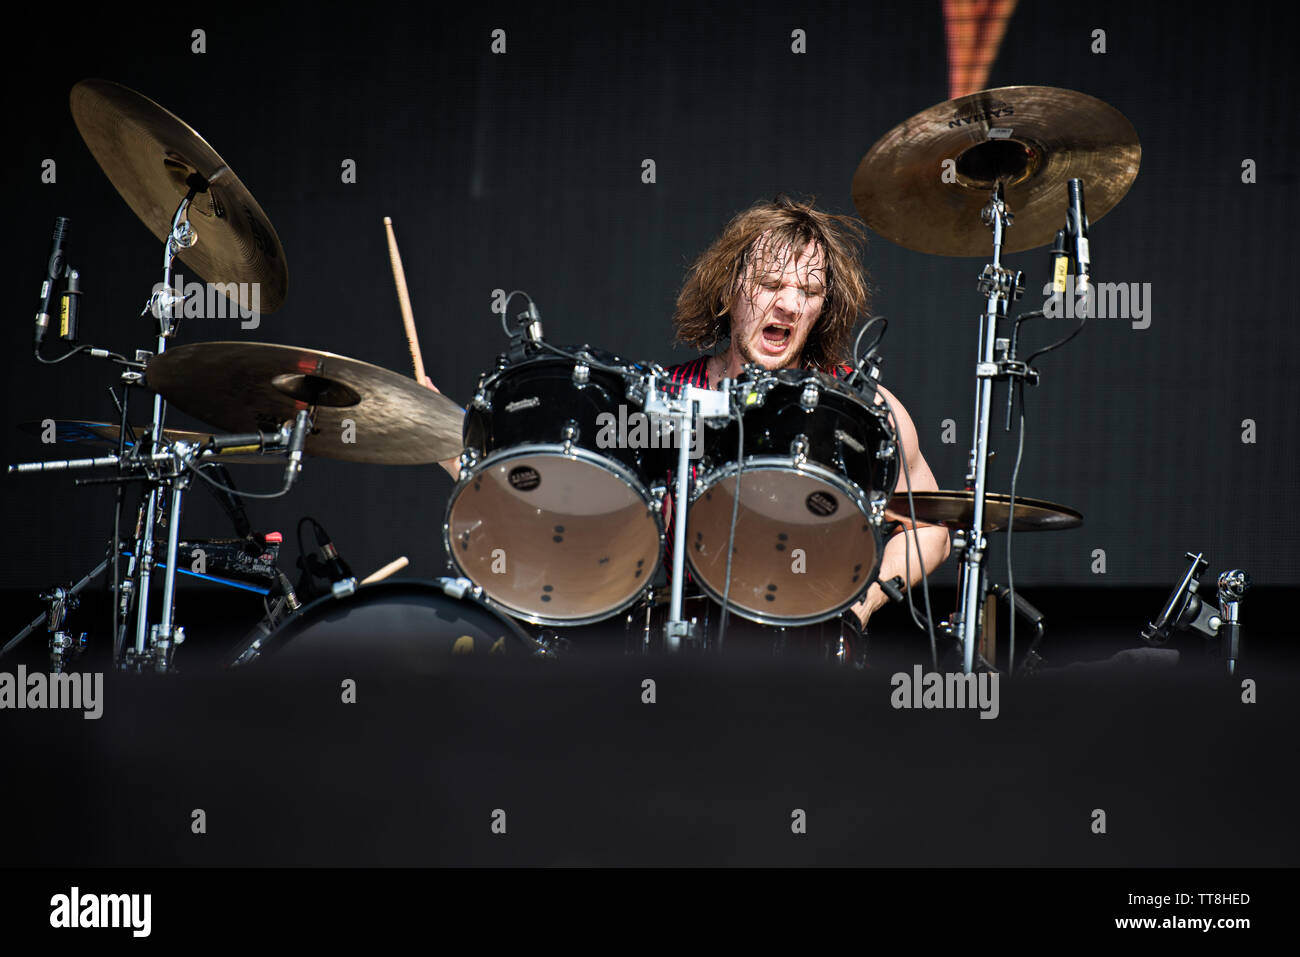 Gethin Davies, drummer of the english band The Struts, performing live on stage at the Firenze Rocks festival 2019 in Florence, Italy, opening for Edd Stock Photo